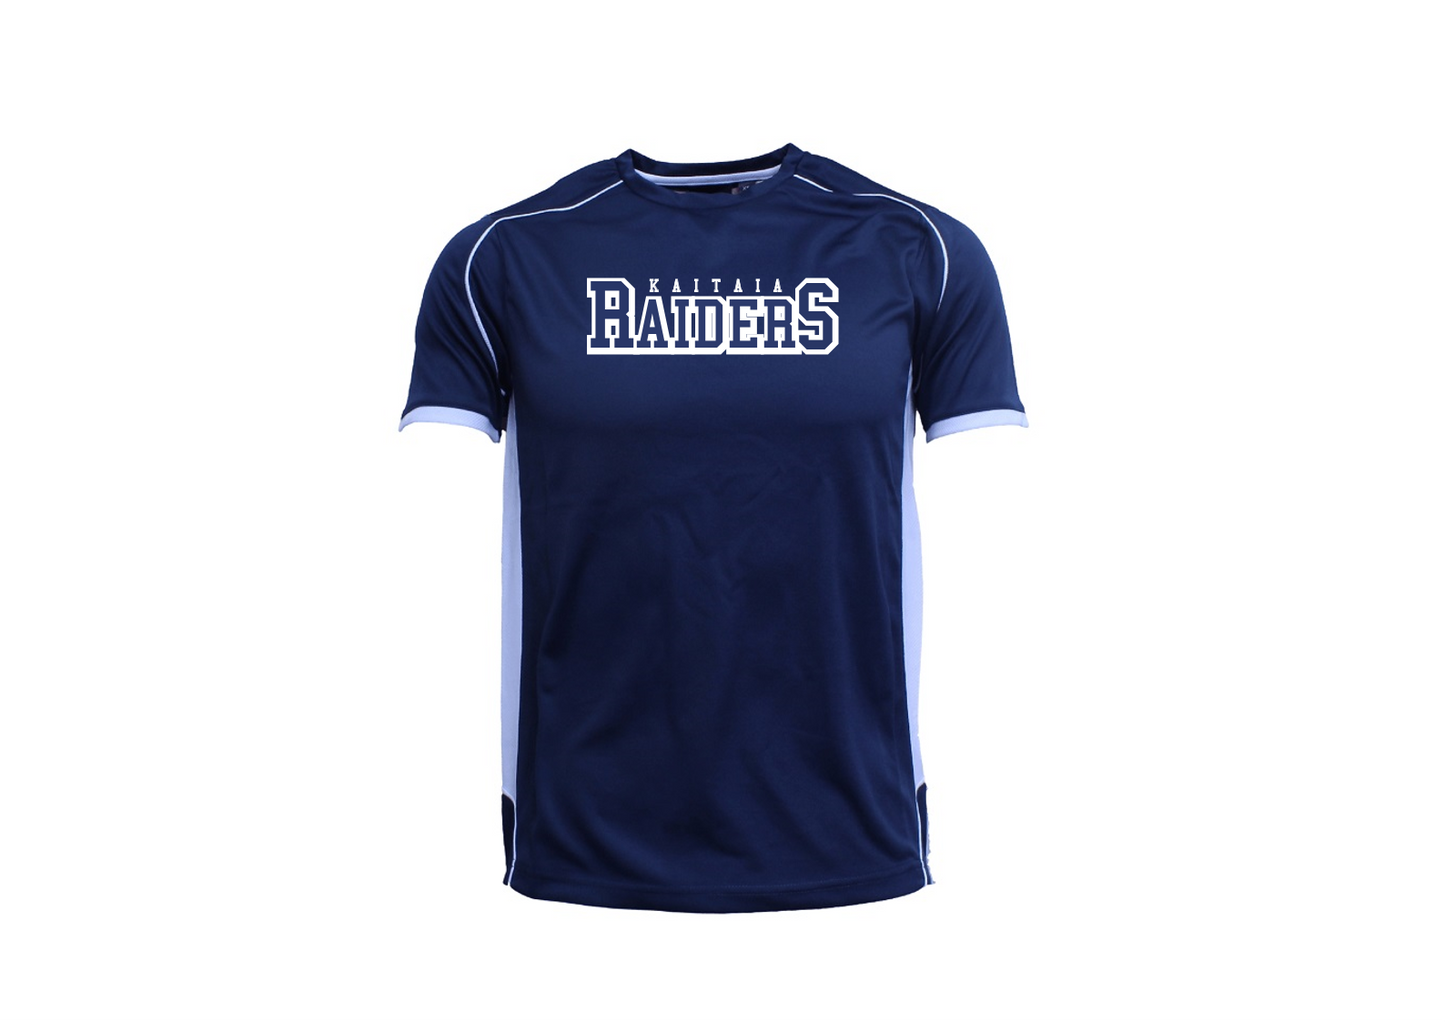 Kaitaia Raiders ADULT Quick Dry / Polyester Tee